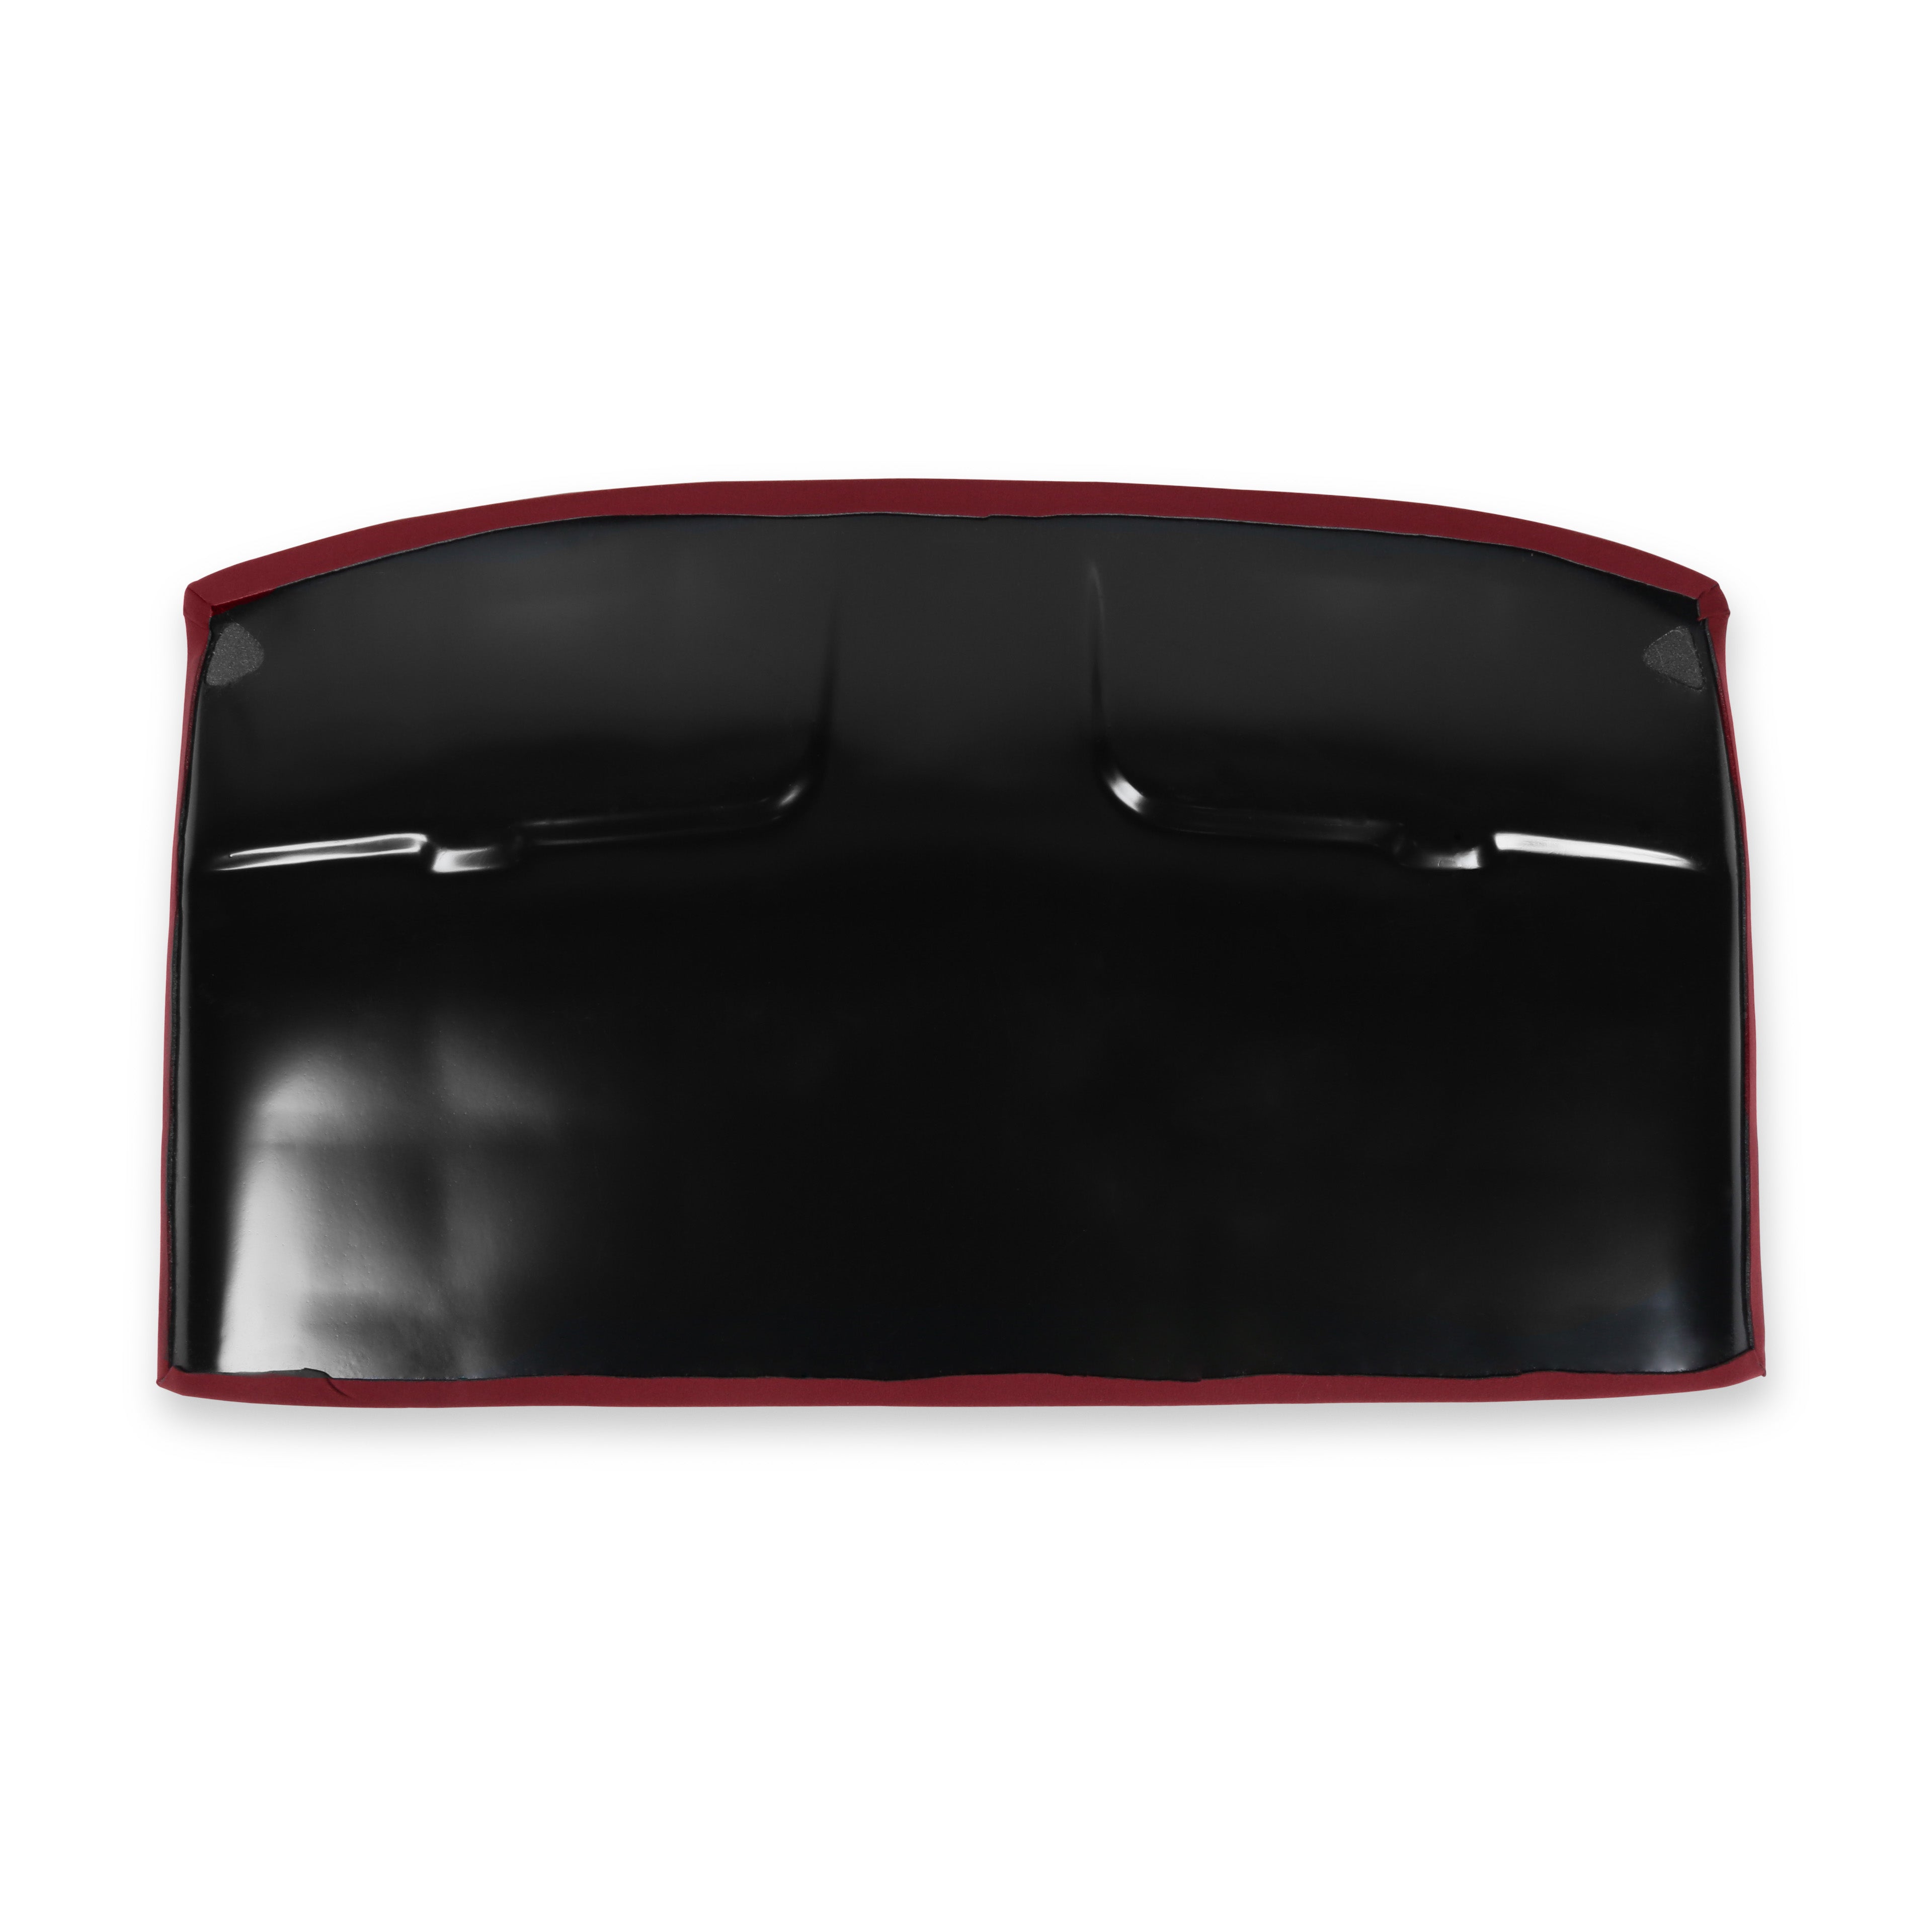 BROTHERS GMT400 Foamback Headliner - Cloth - Red pn 05-335